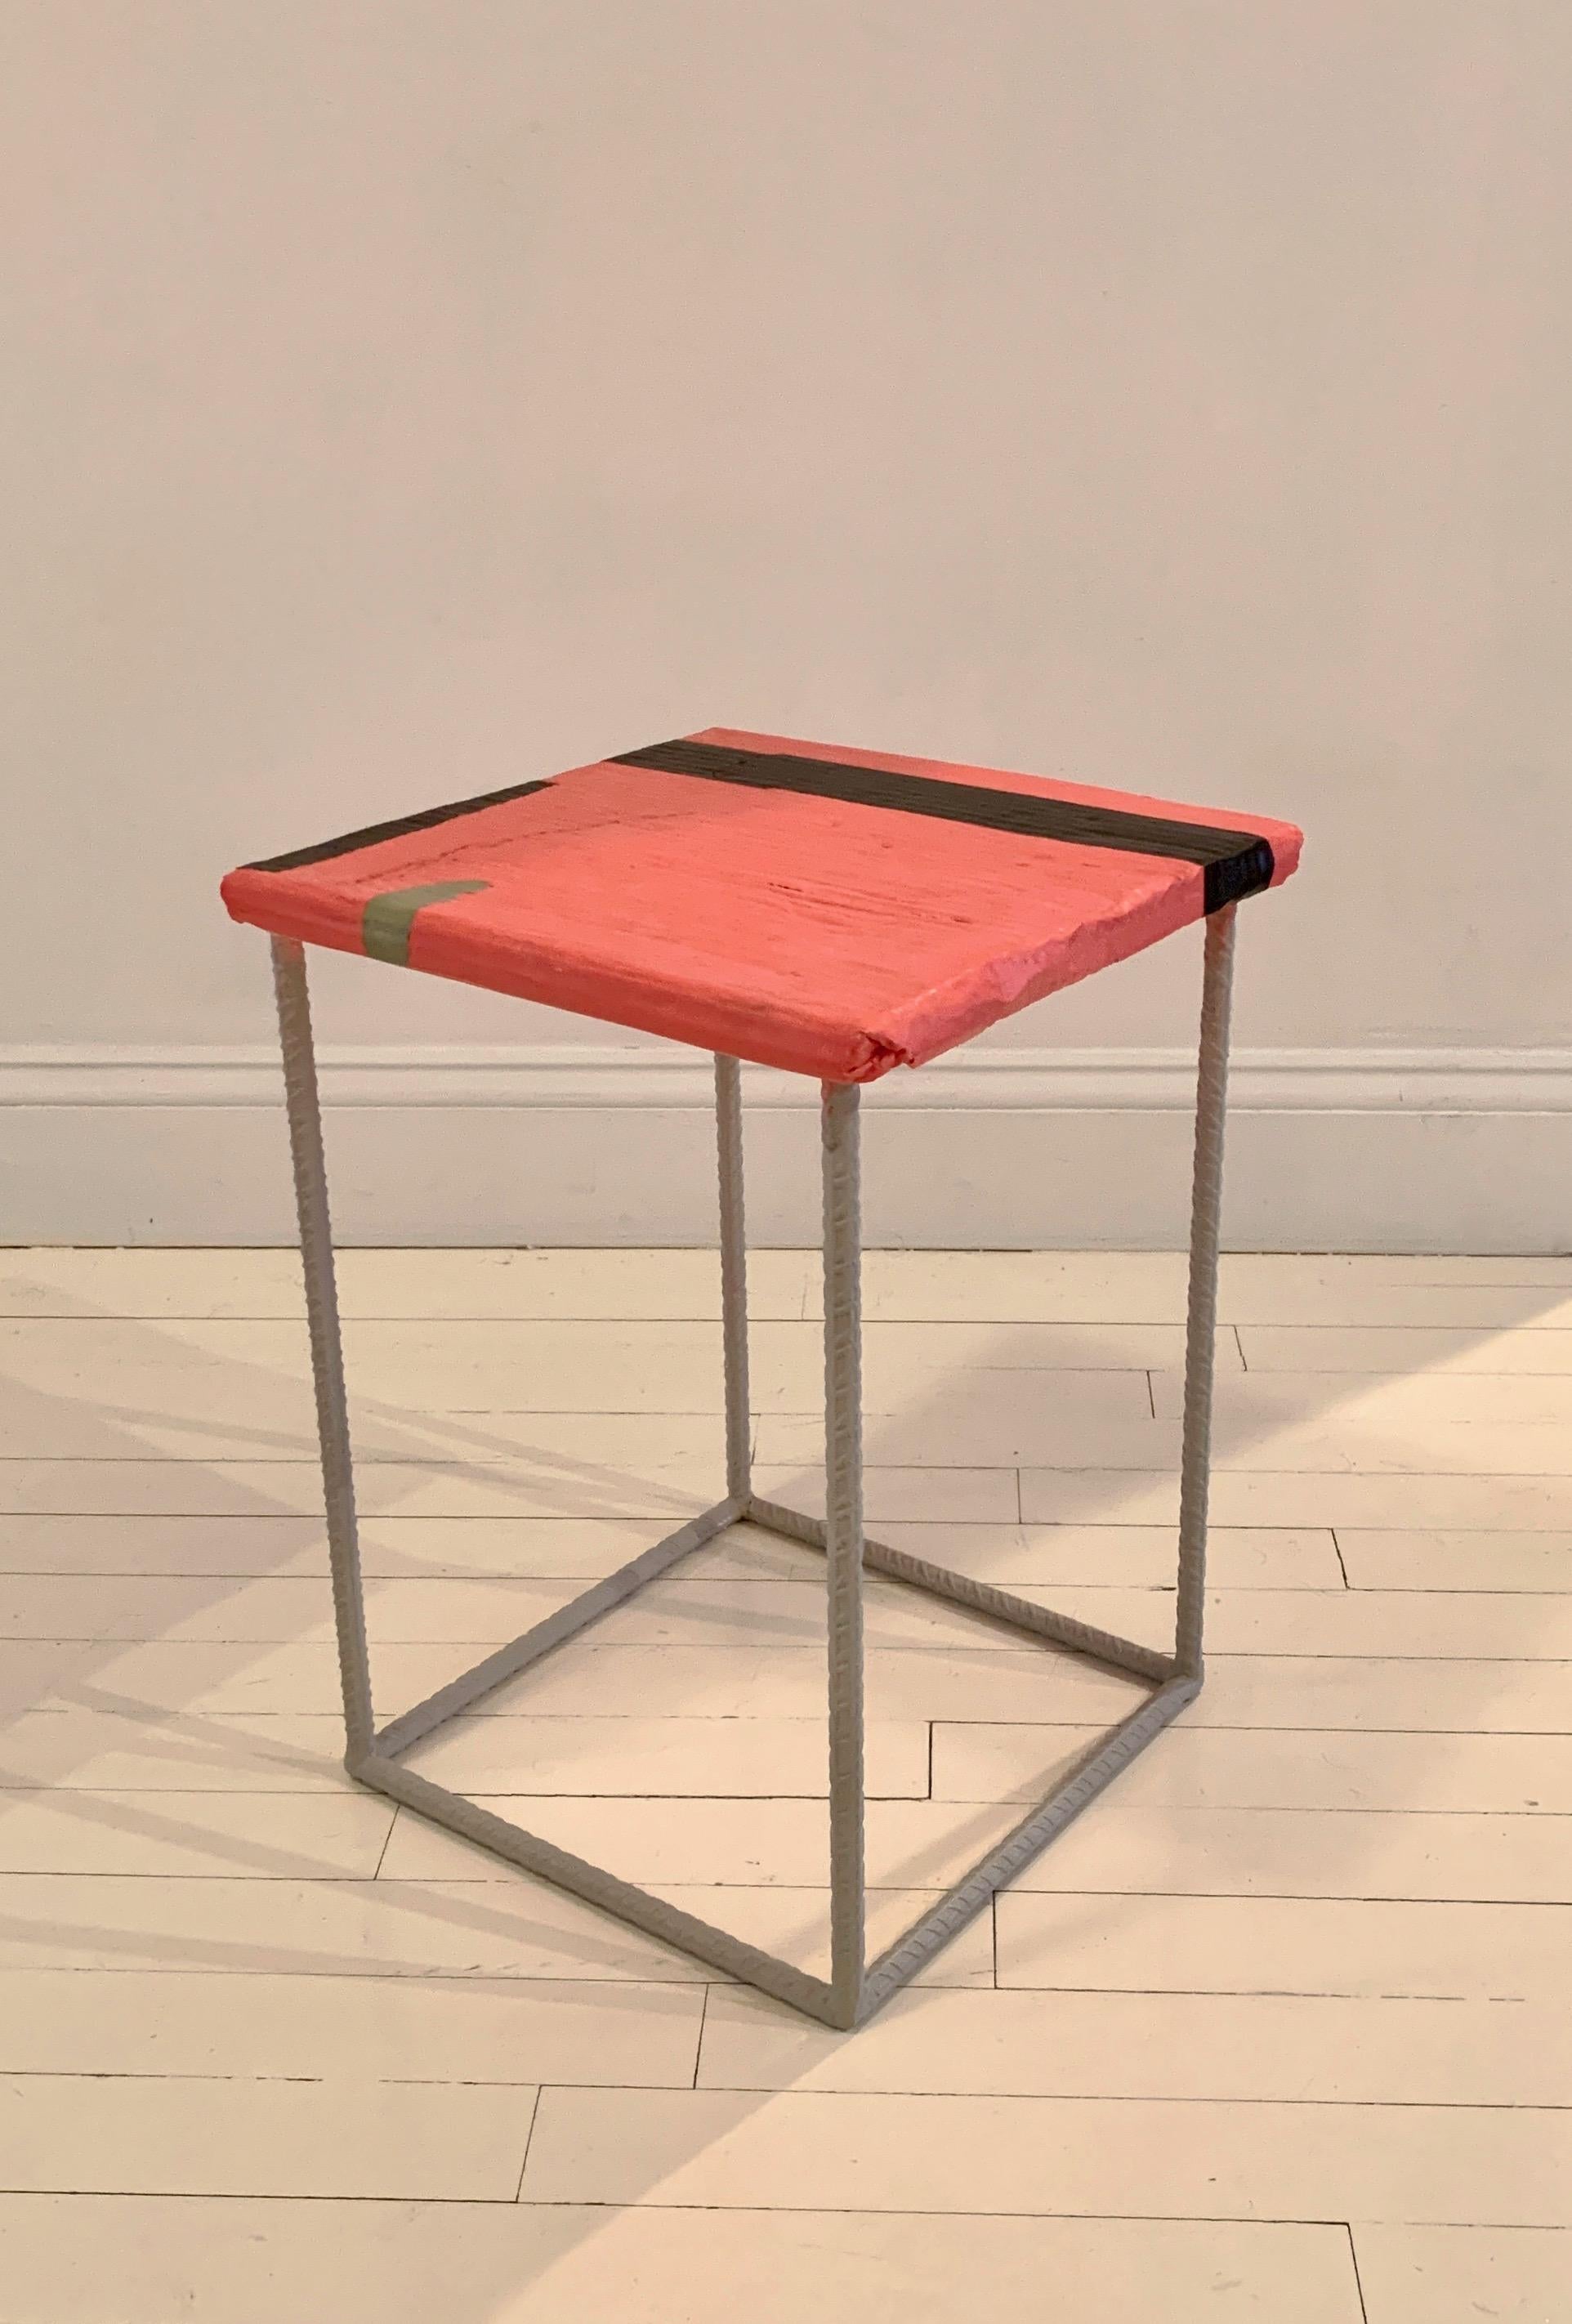 Stool
2017
Jesmonite, fiberglass, rebar, paint
16 5/8 x 12 5/8 x 12 1/4 inches (42.2 x 32.1 x 31.1 cm)
ER 149

Can be used as a side table as seen in photo listings. 

Purchased from 303 Gallery 2017.